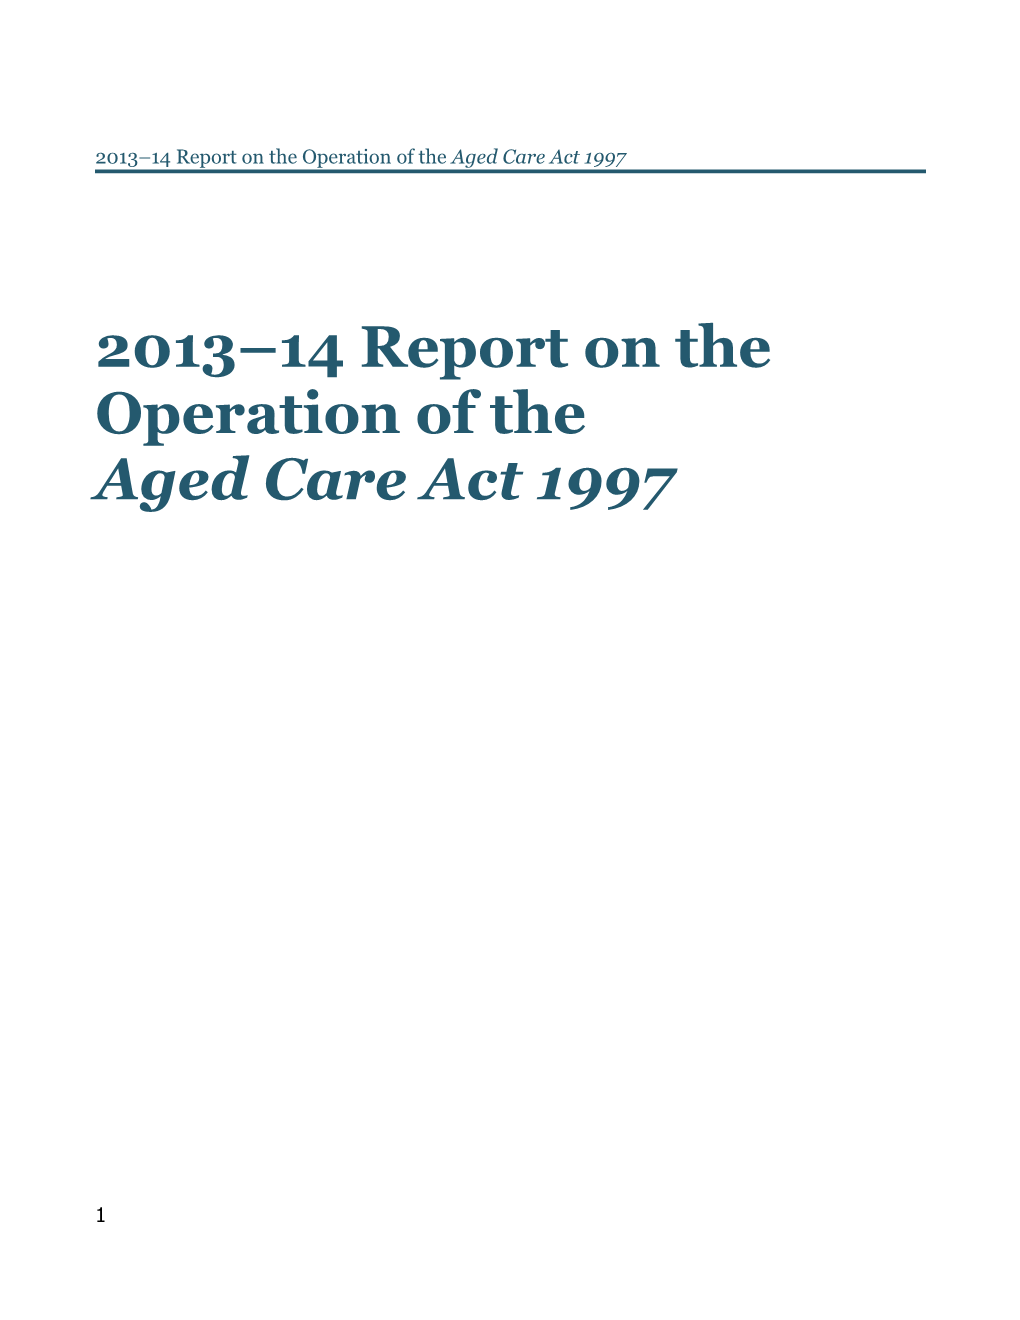 2013 14 Report on the Operation of the Aged Care Act 1997